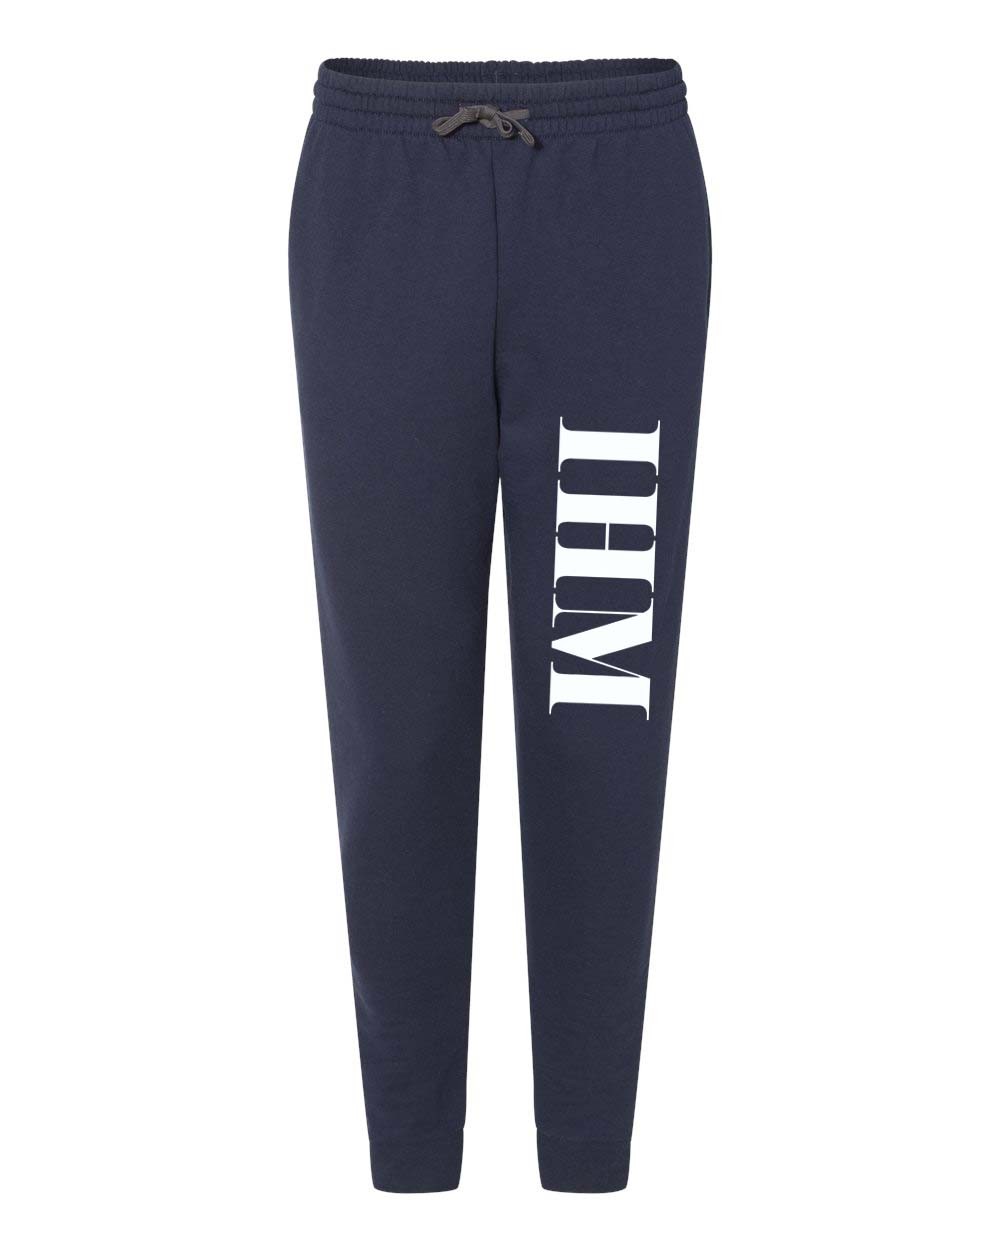 IHM Spirit Joggers w/ White IHM Logo - Please Allow 2-3 Weeks for Delivery